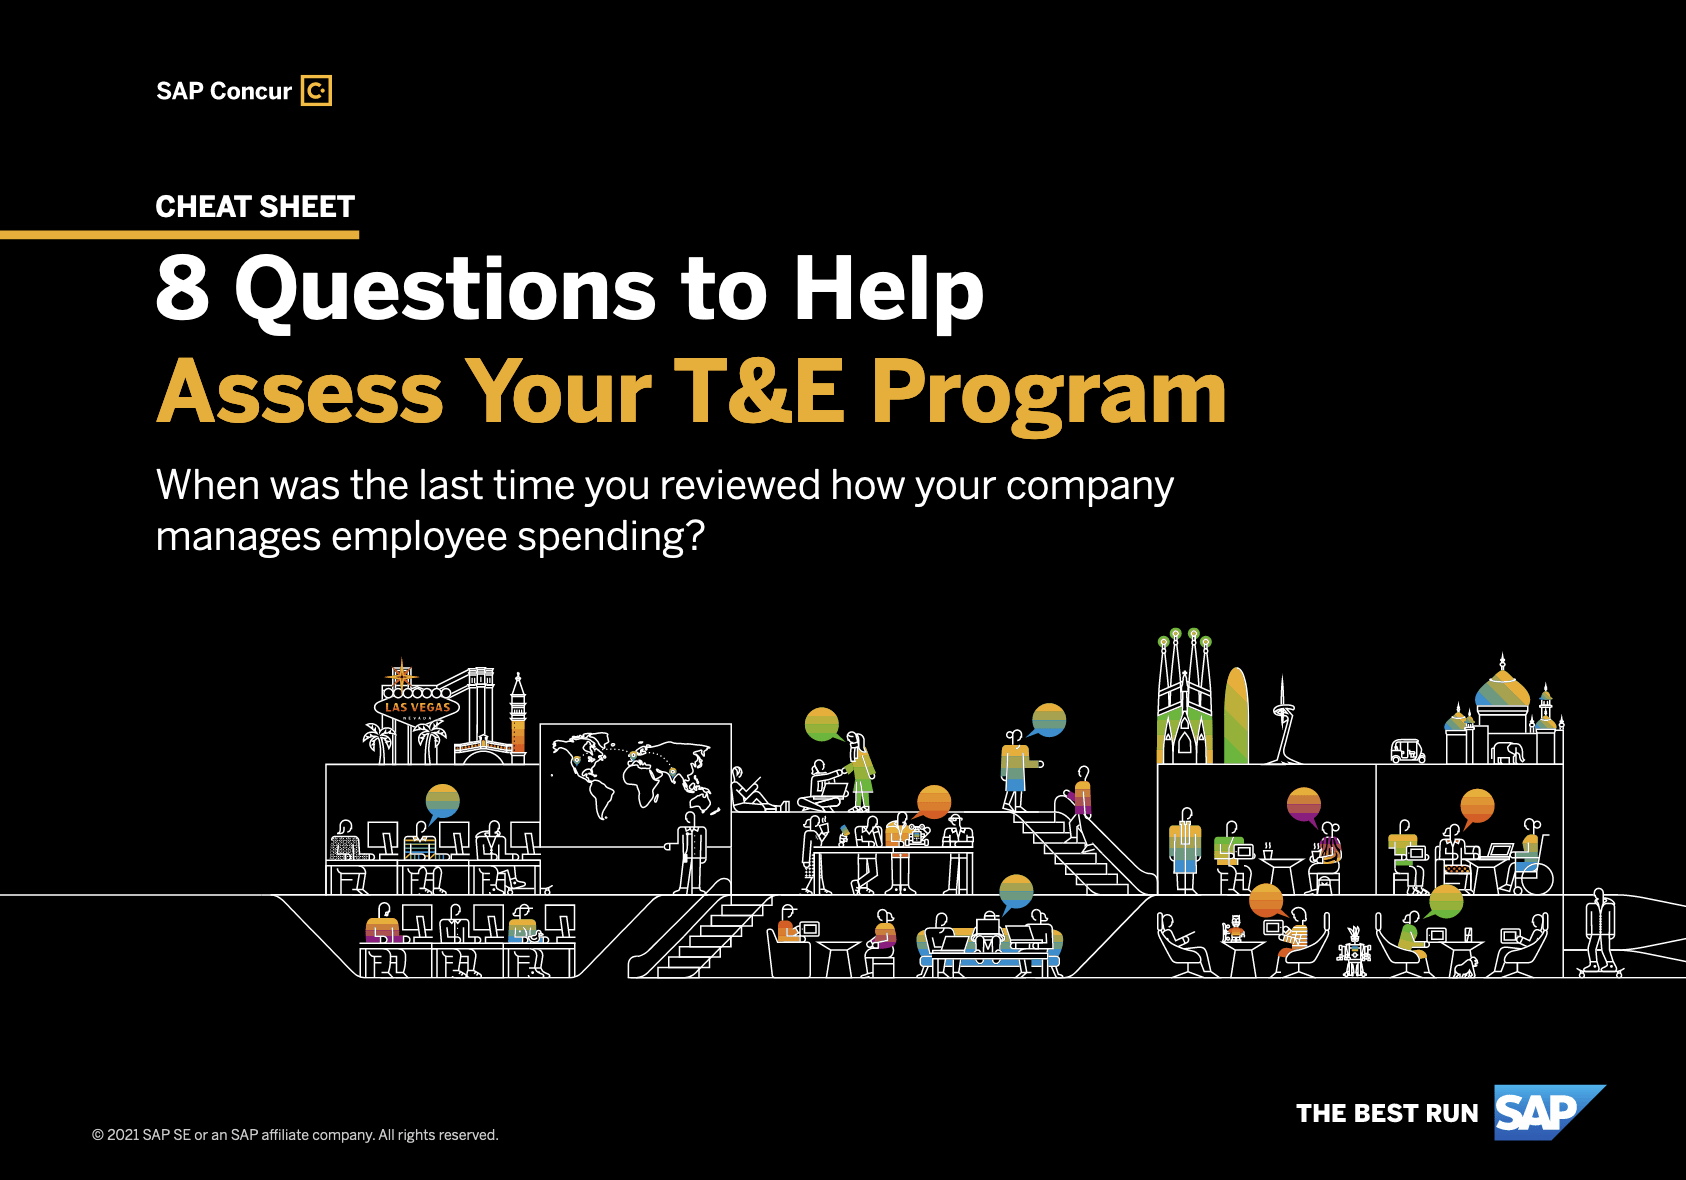 8 Questions - 8 Questions to Help Assess Your T&E Program [Cheat Sheet]